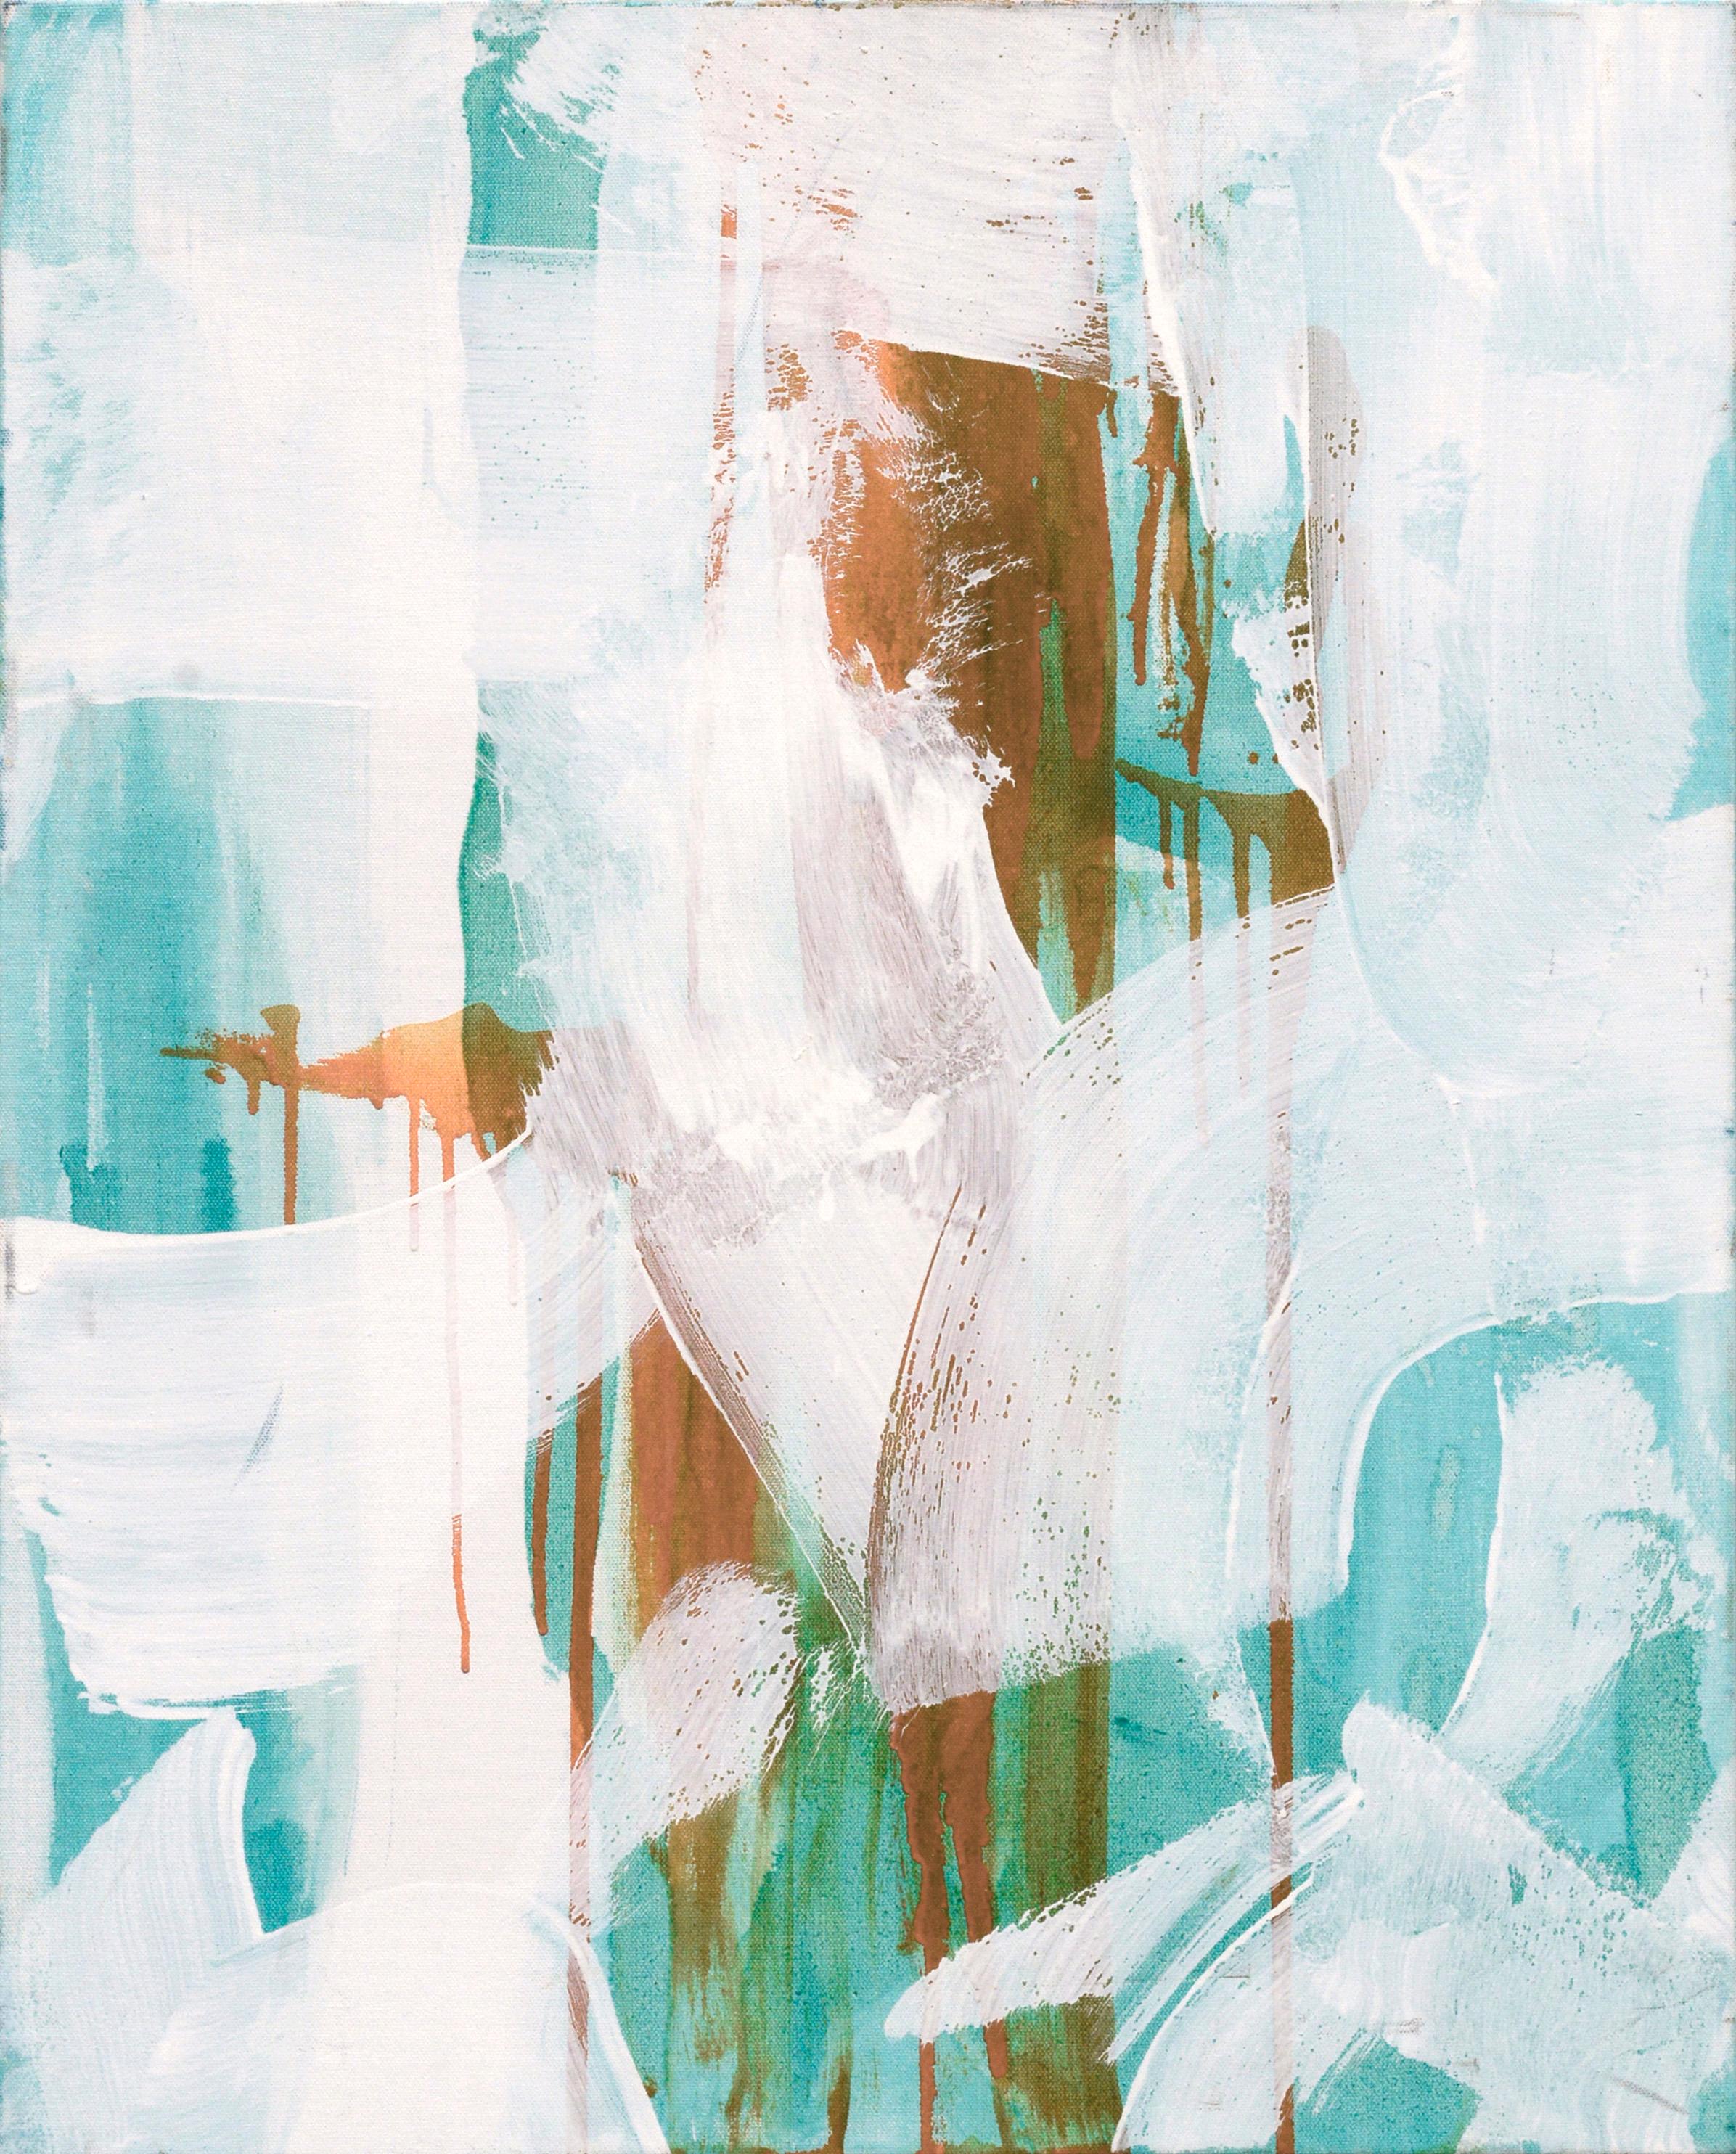 Unknown Abstract Painting - Teal, White, and Orange Abstract